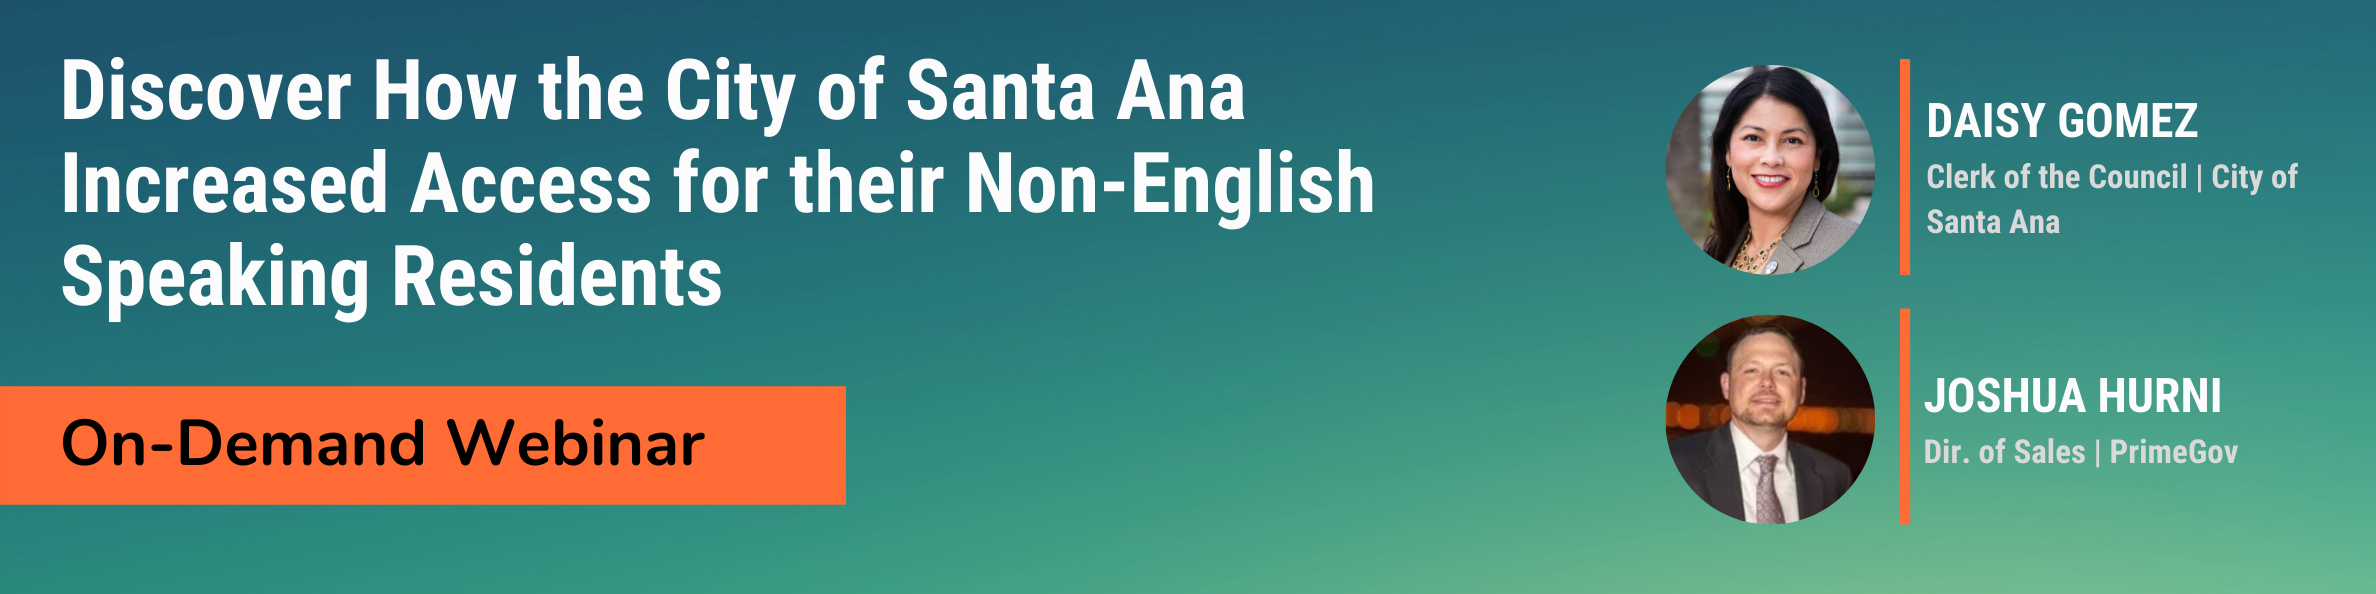 Discover How the City of Santa Ana Increased Access for their Non-English Speaking Residents